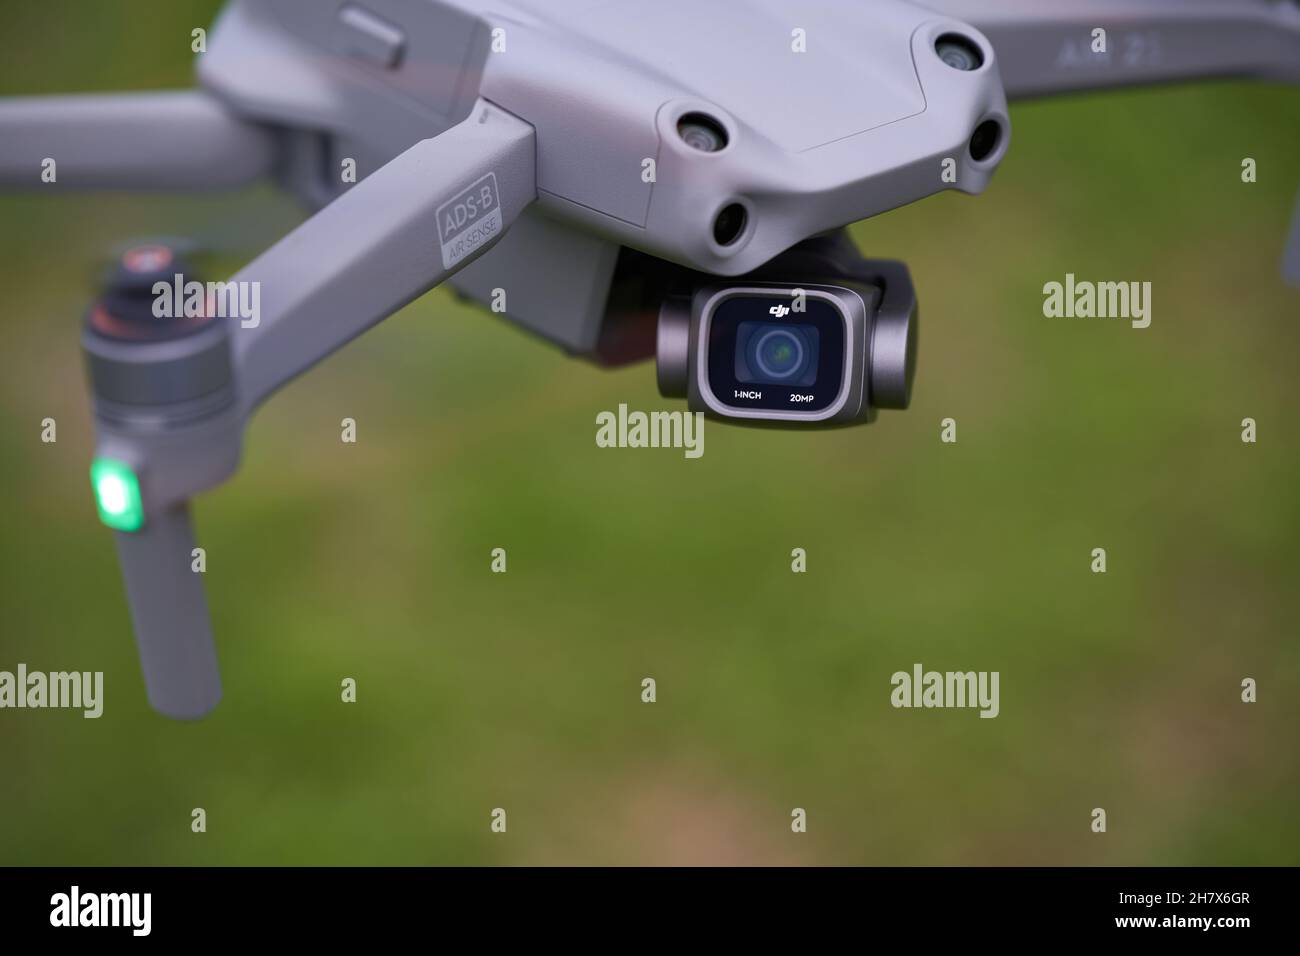 Nürtingen, Germany - June 26, 2021: Part of the Dji air 2s drone. Gray  multicopter with sensors and 1 Inch camera. Green meadow depth of field.  High a Stock Photo - Alamy